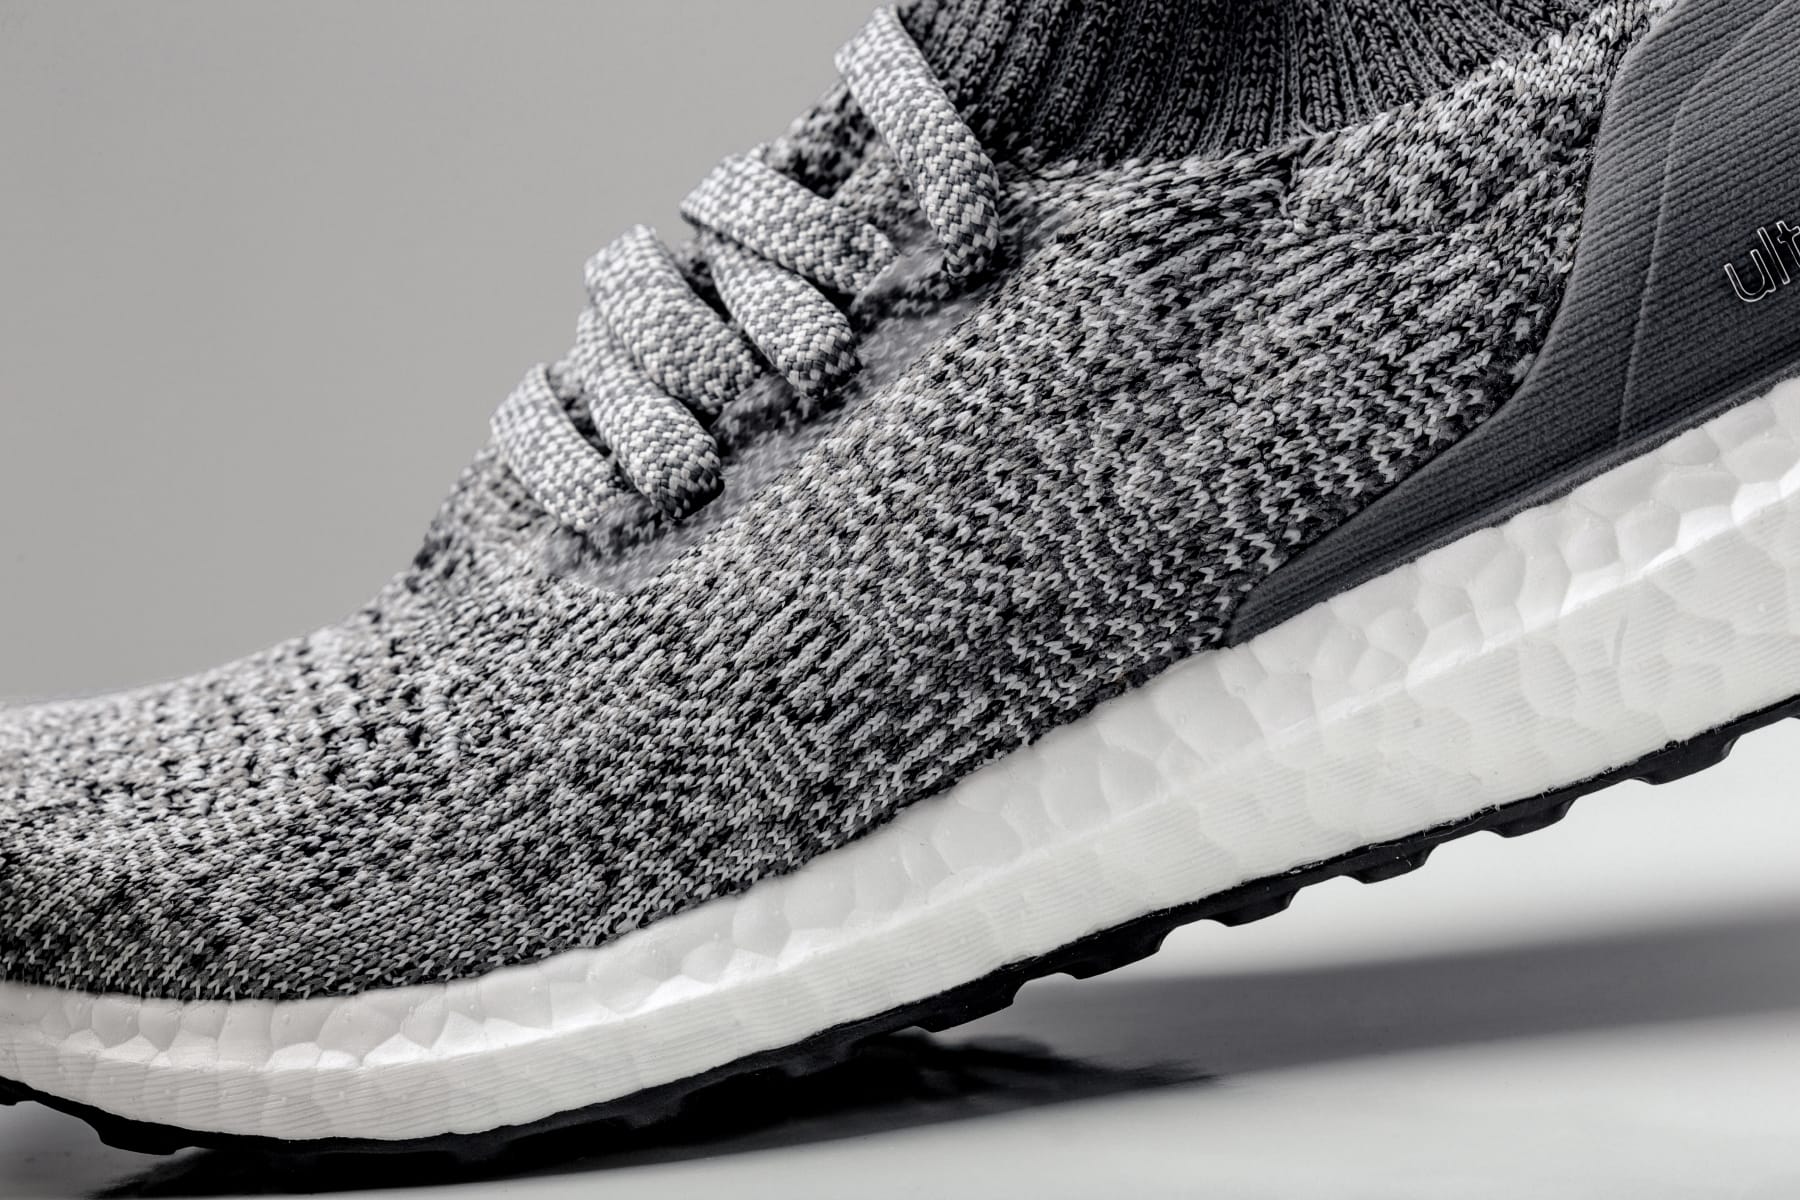 ultra boost 4.0 uncaged